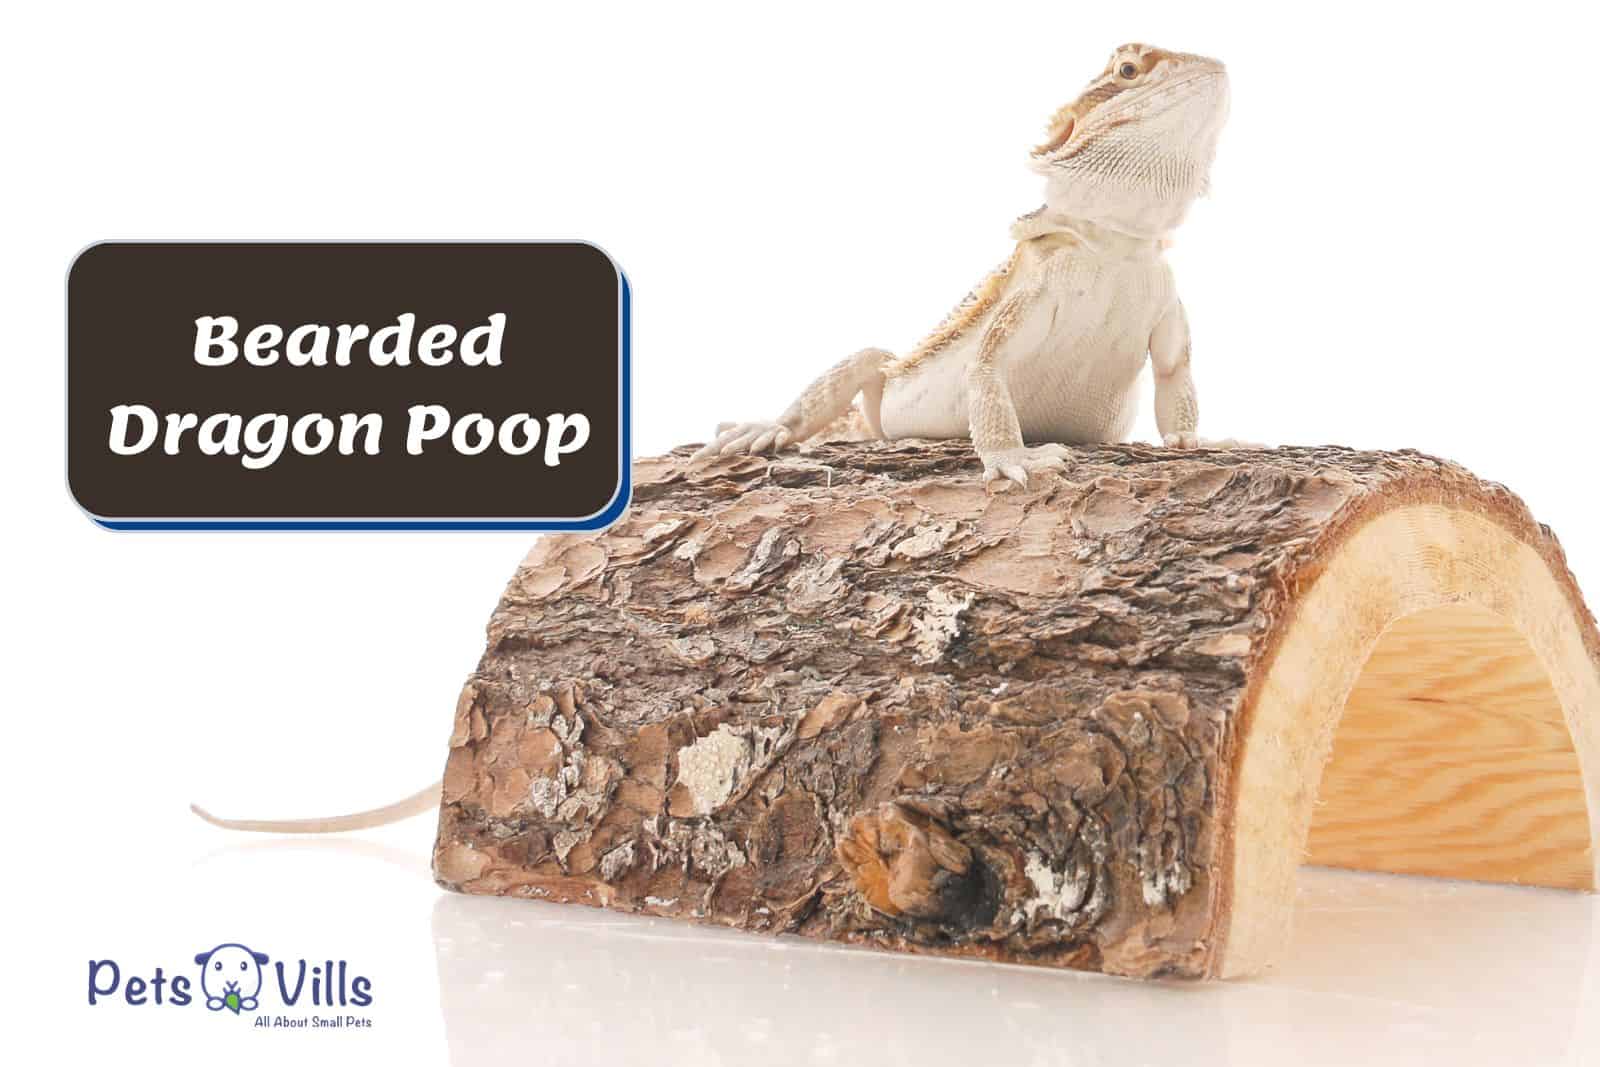 bearded dragon on top of a wood beside Bearded Dragon Poop sign